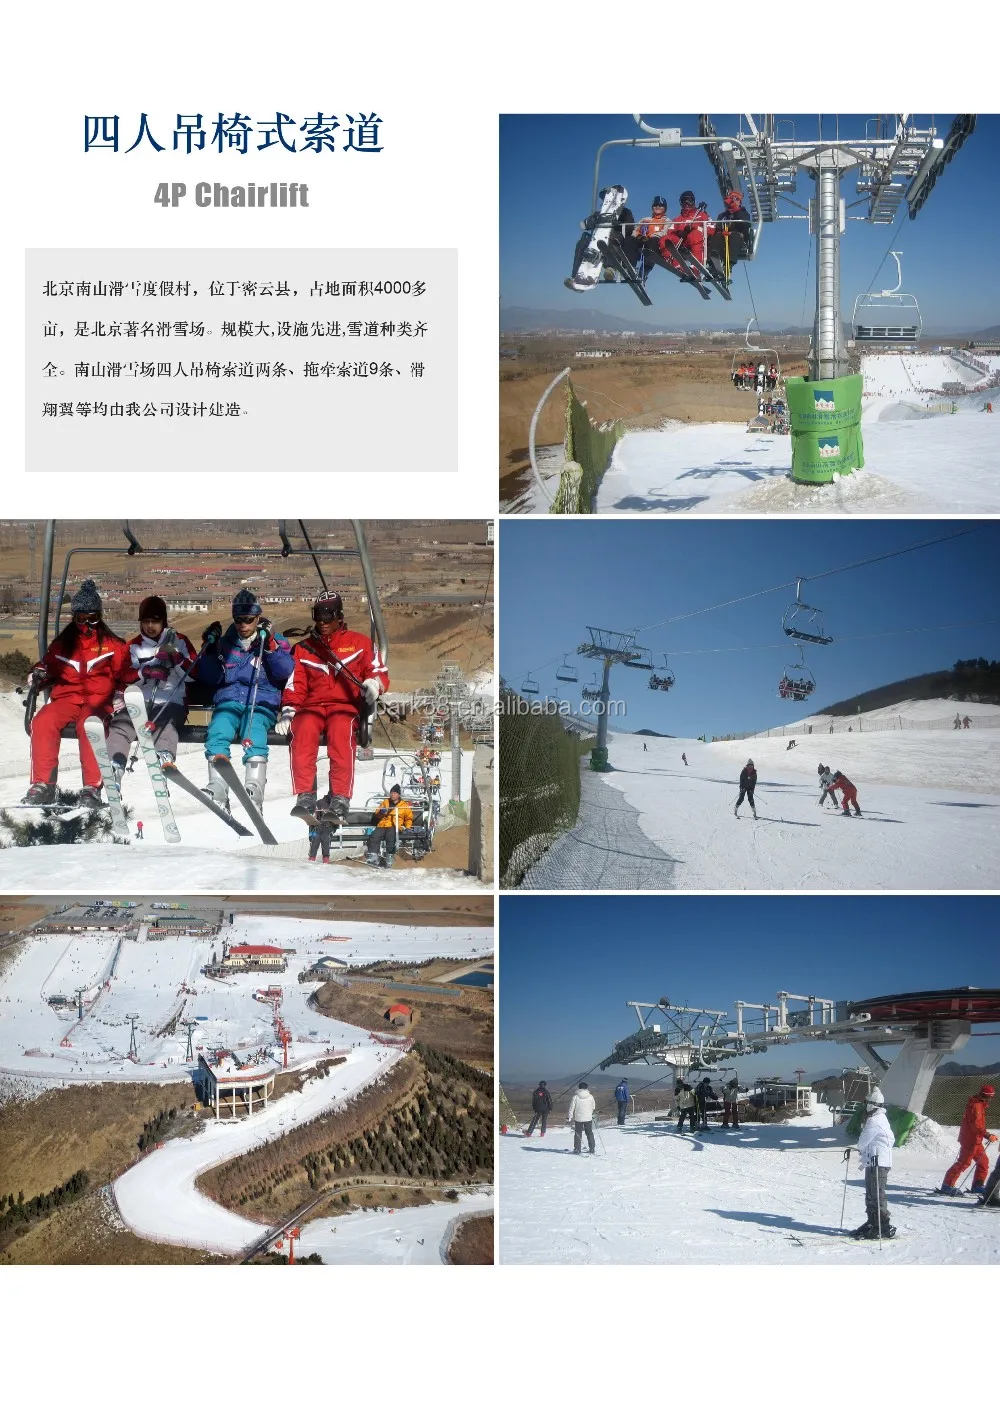 Ski Chairlifts Ropeway Equipment For Sale Manufacturer Buy Ski